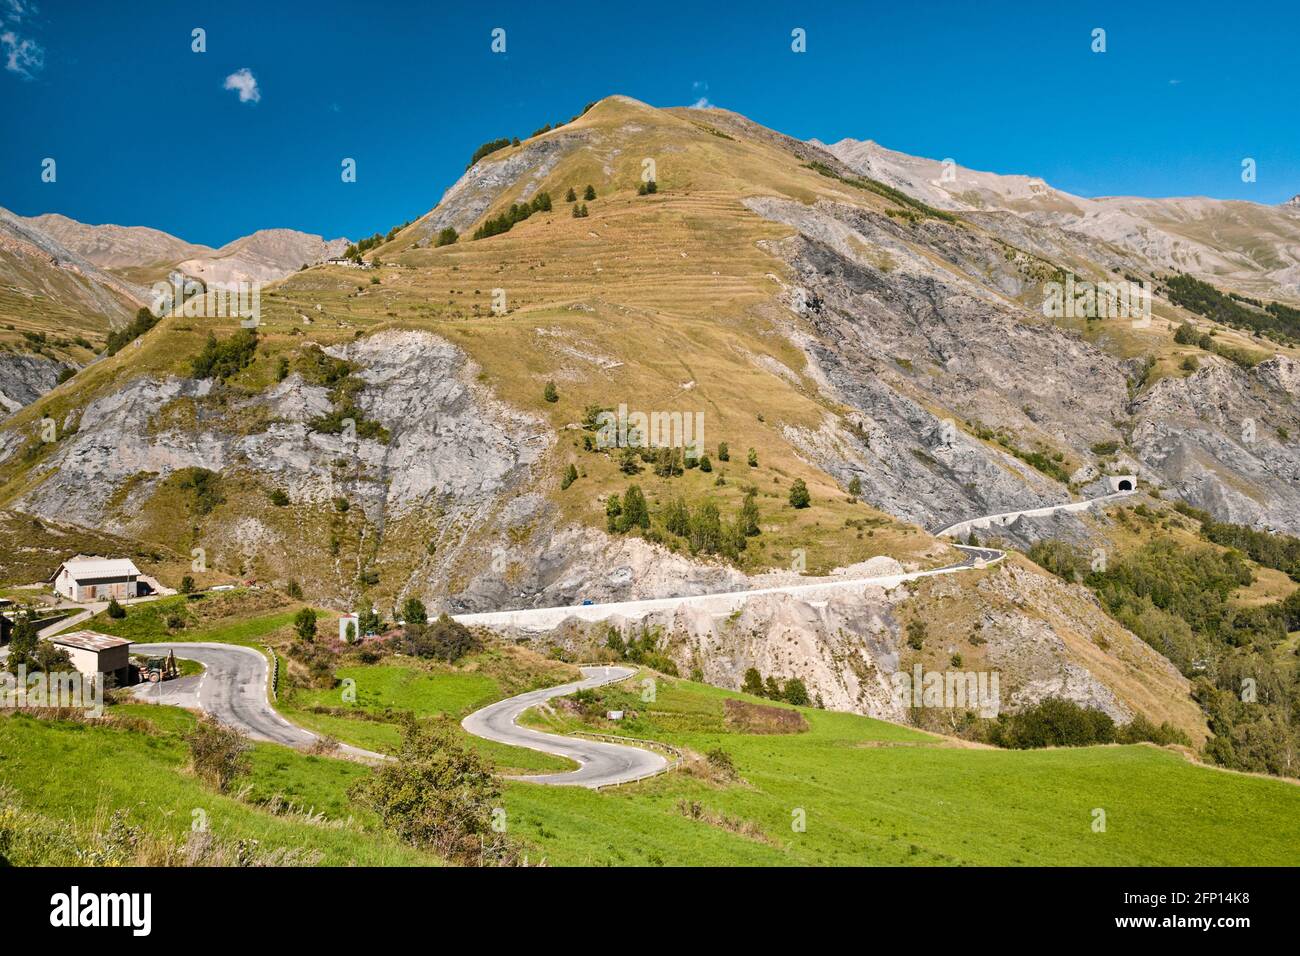 Winding scenic mountain road and tunnel near La Grave town in the Oisans Massif, Hautes-Alpes (05), Provence-Alpes-Cote d'Azur region, France Stock Photo